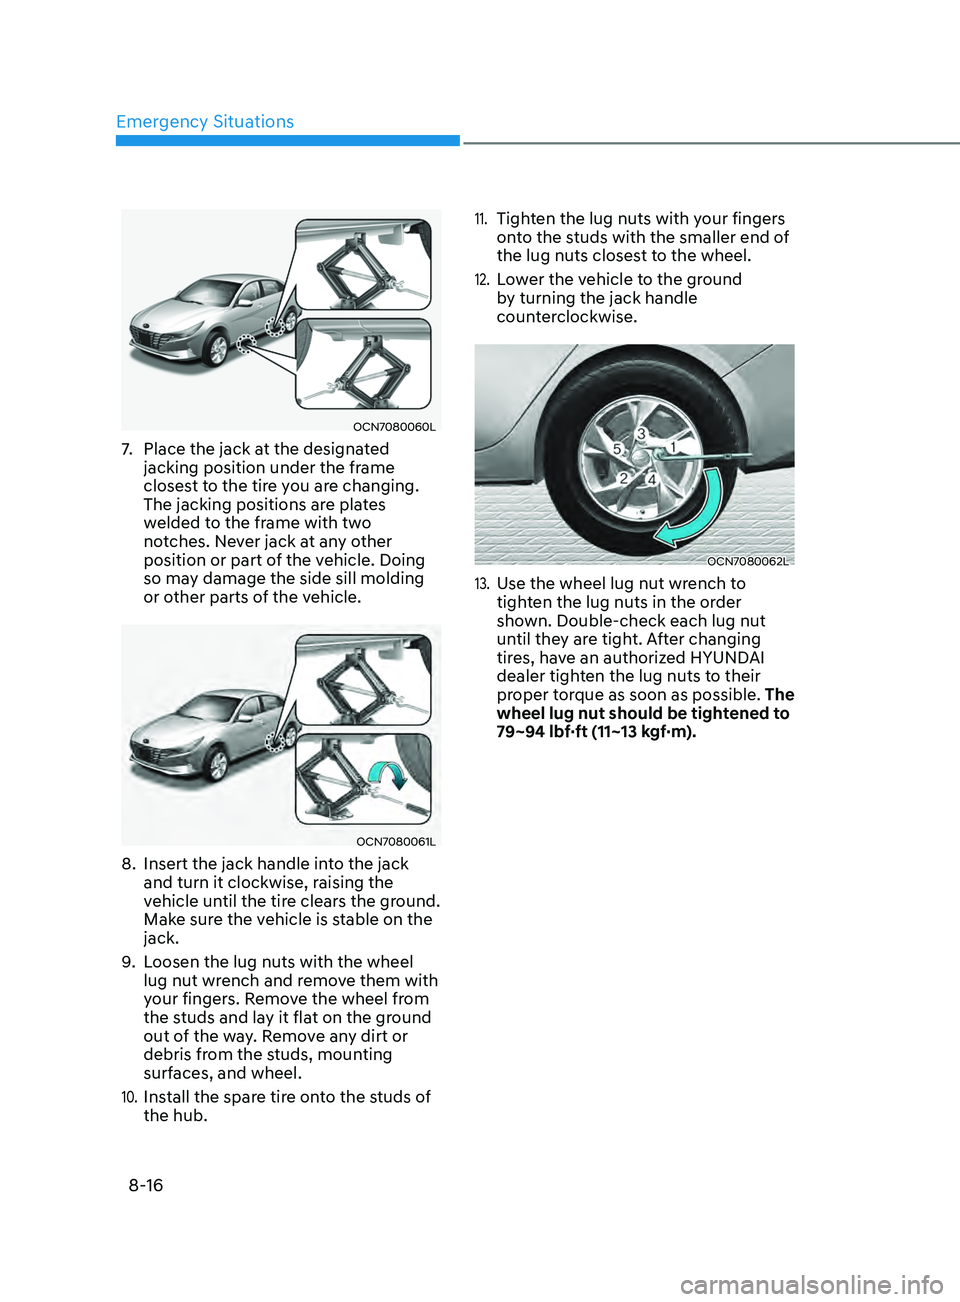 HYUNDAI ELANTRA SEL 2021  Owners Manual Emergency Situations
8-16
OCN7080060L
7. Place the jack at the designated 
jacking position under the frame 
closest to the tire you are changing. 
The jacking positions are plates 
welded to the fram